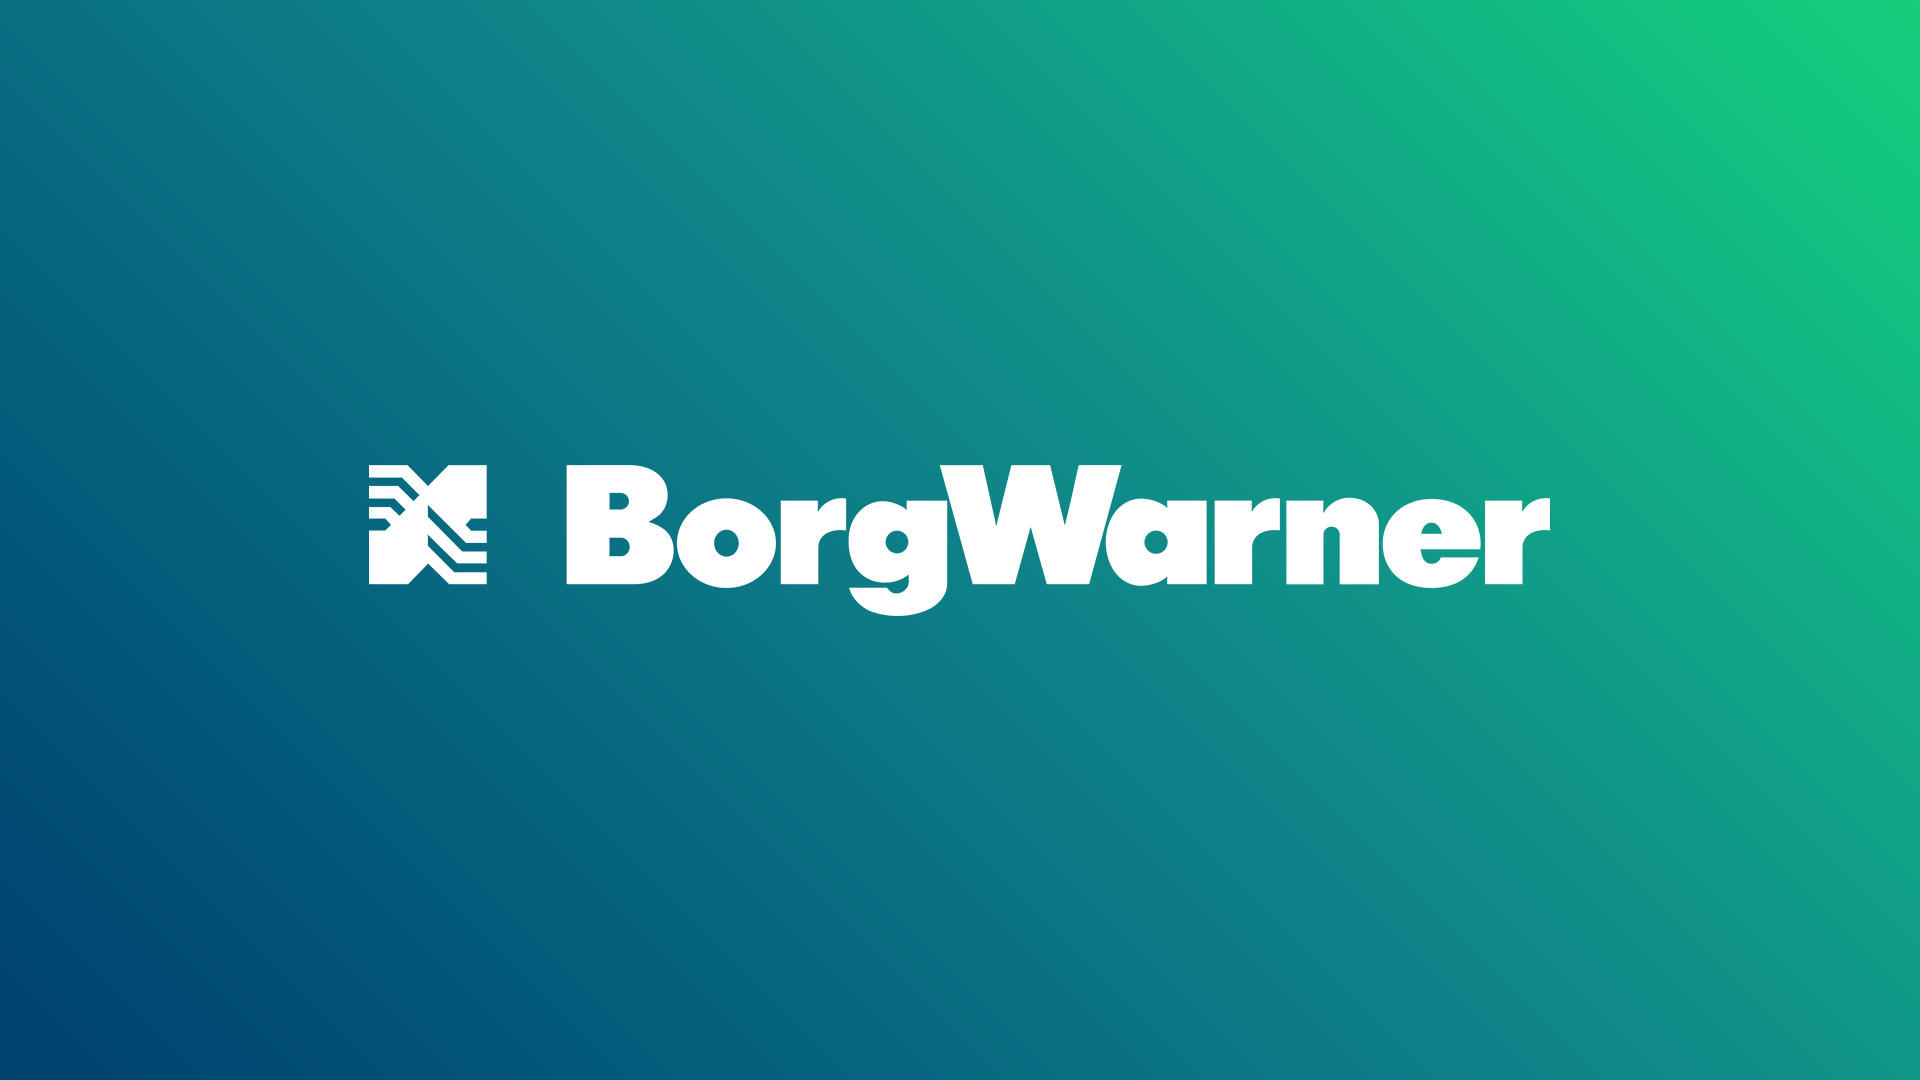 BorgWarner logo on blue and green gradient announcing company news